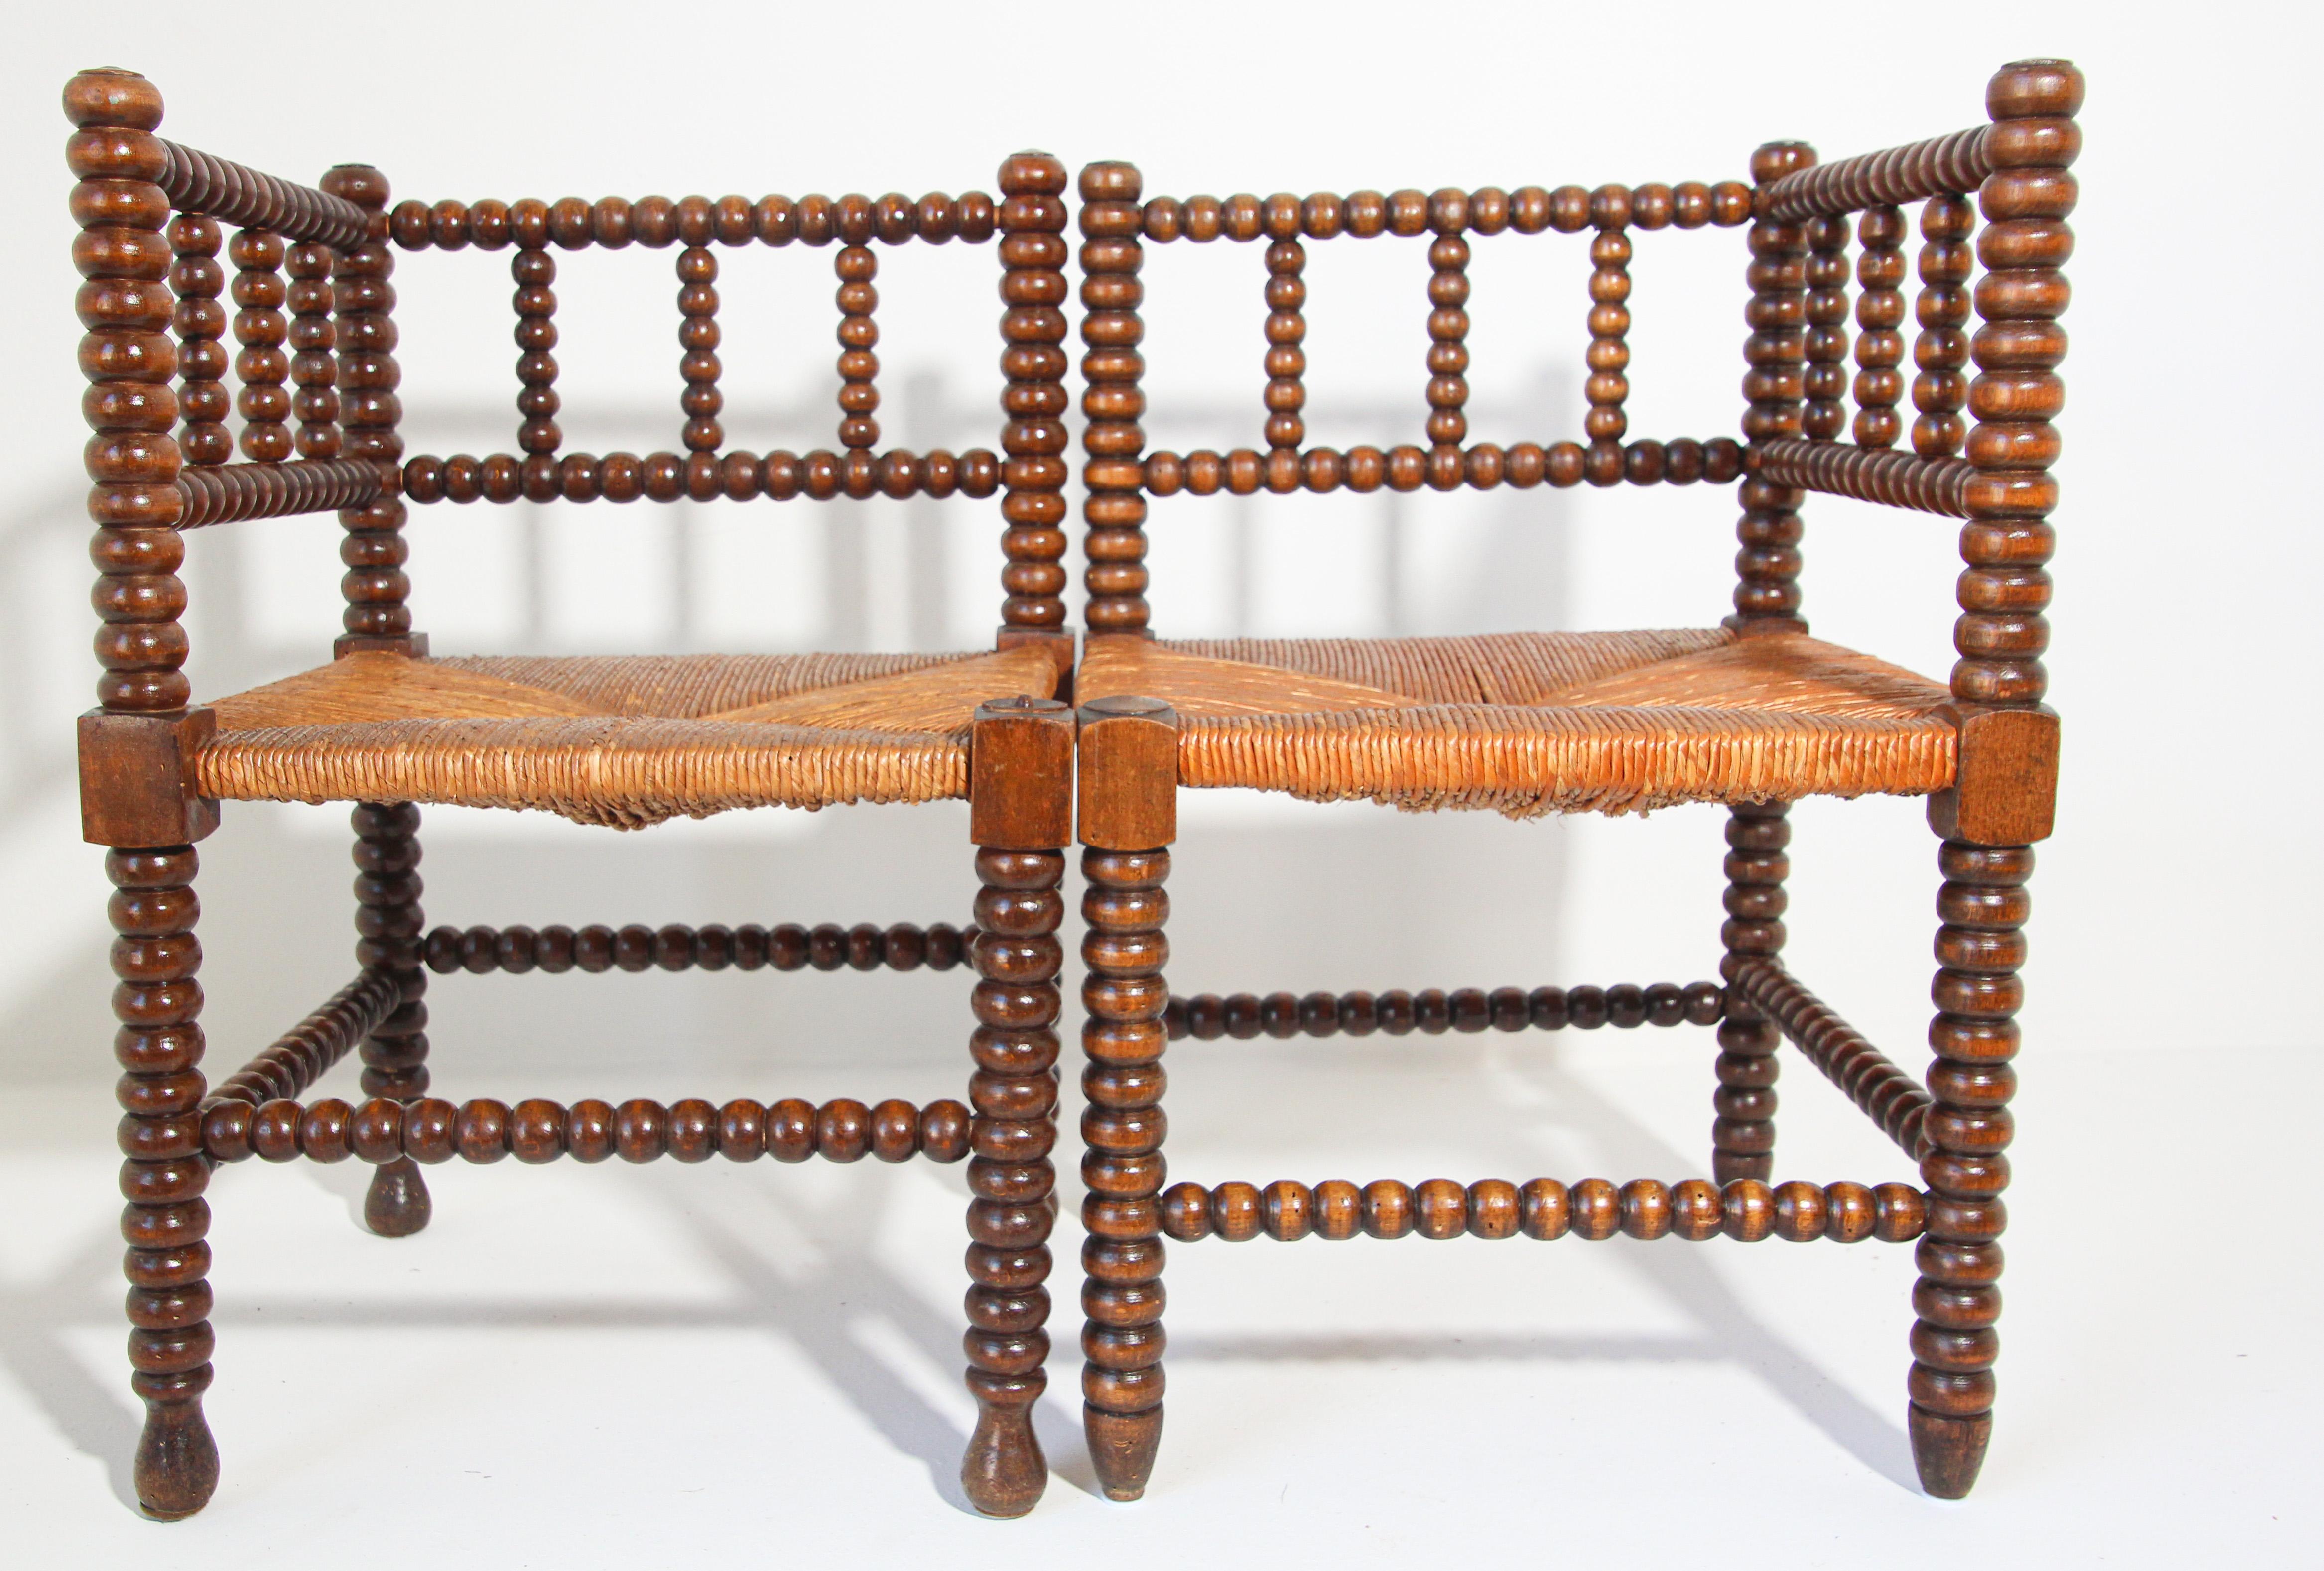 French Provincial French Rush-Seat Corner Chairs in Turned Oak and Cane, France